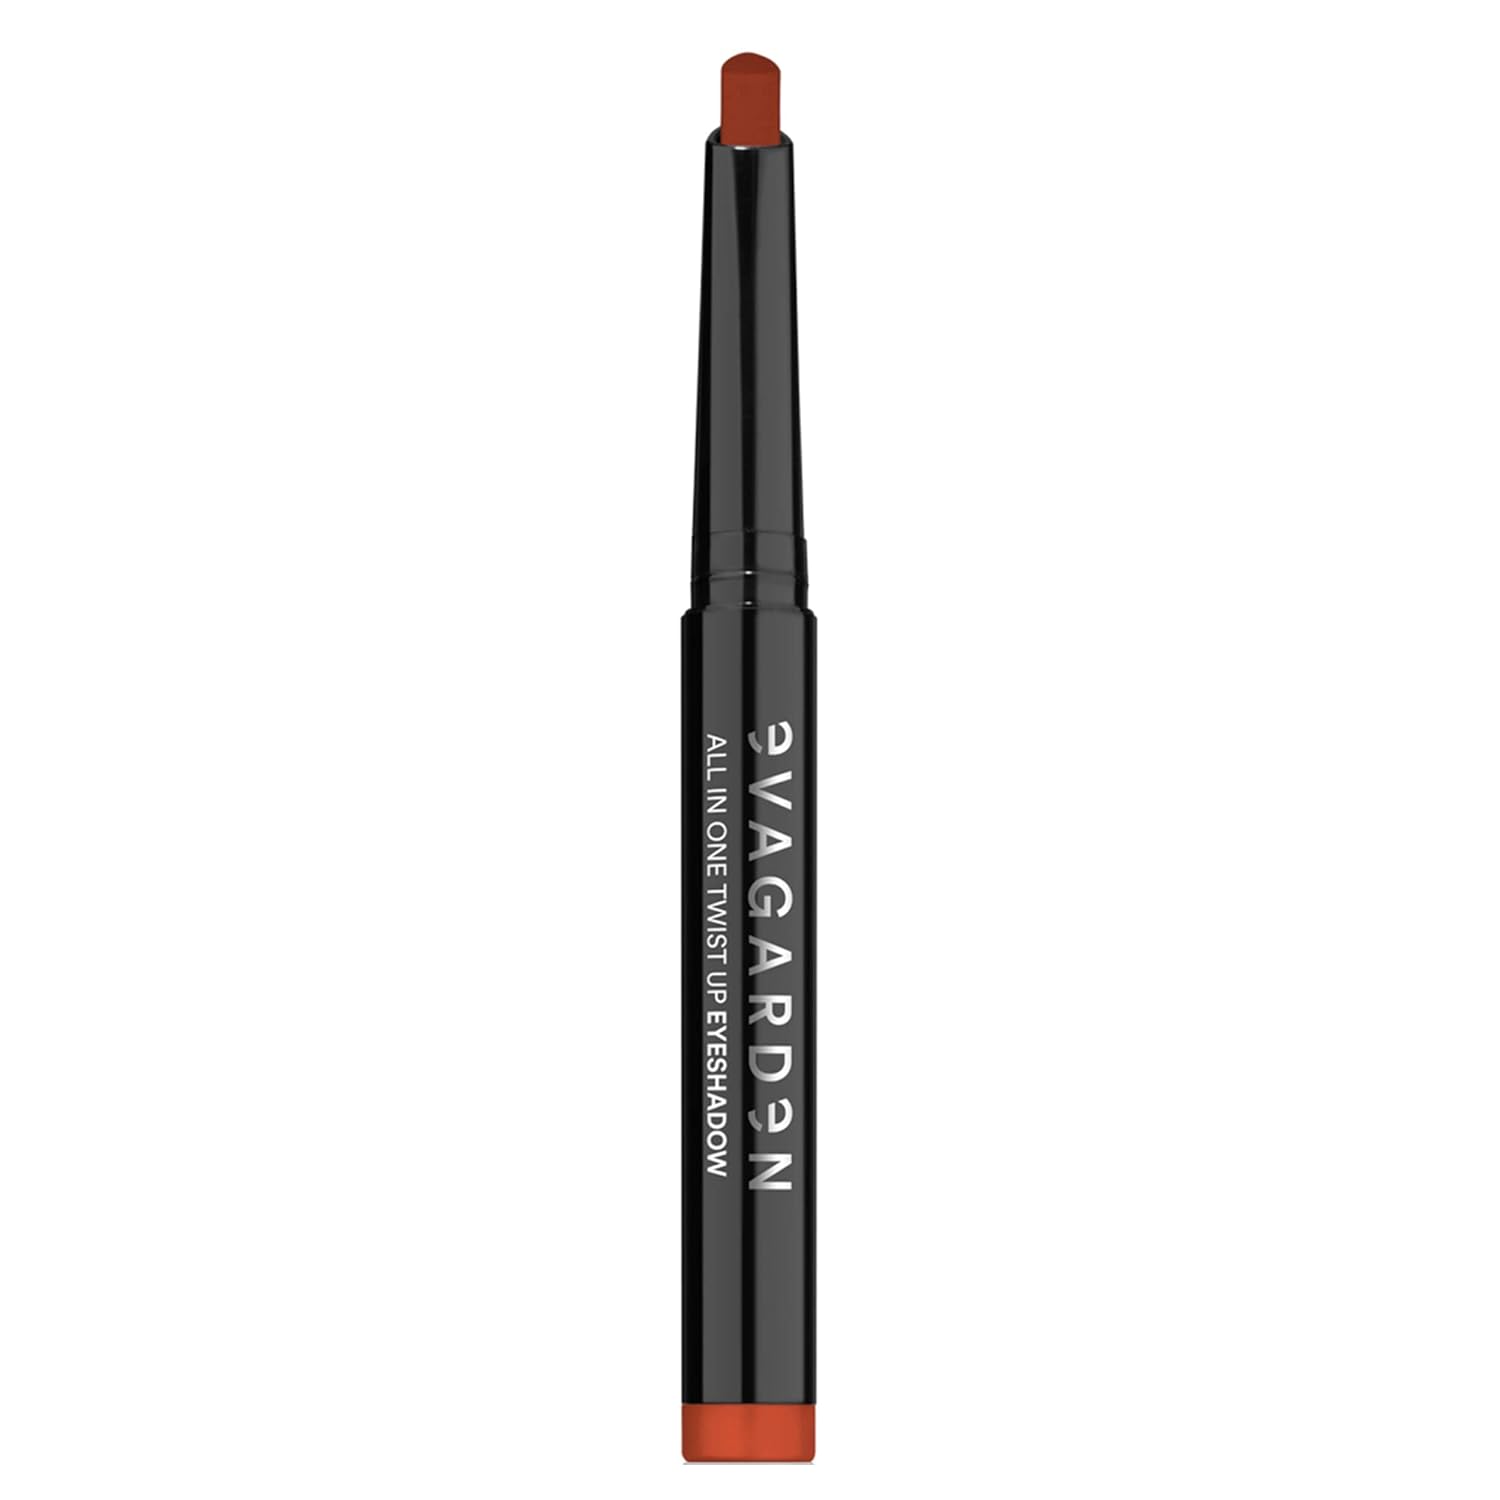 EVAGARDEN All In One Twist Up Eye Shadow - Easy, Fast and Effective Makeup - Creamy, Bold Color Release Blends Effortlessly - Remains Uniform and Bright with No Transfer - 367 Sunset - 0.03